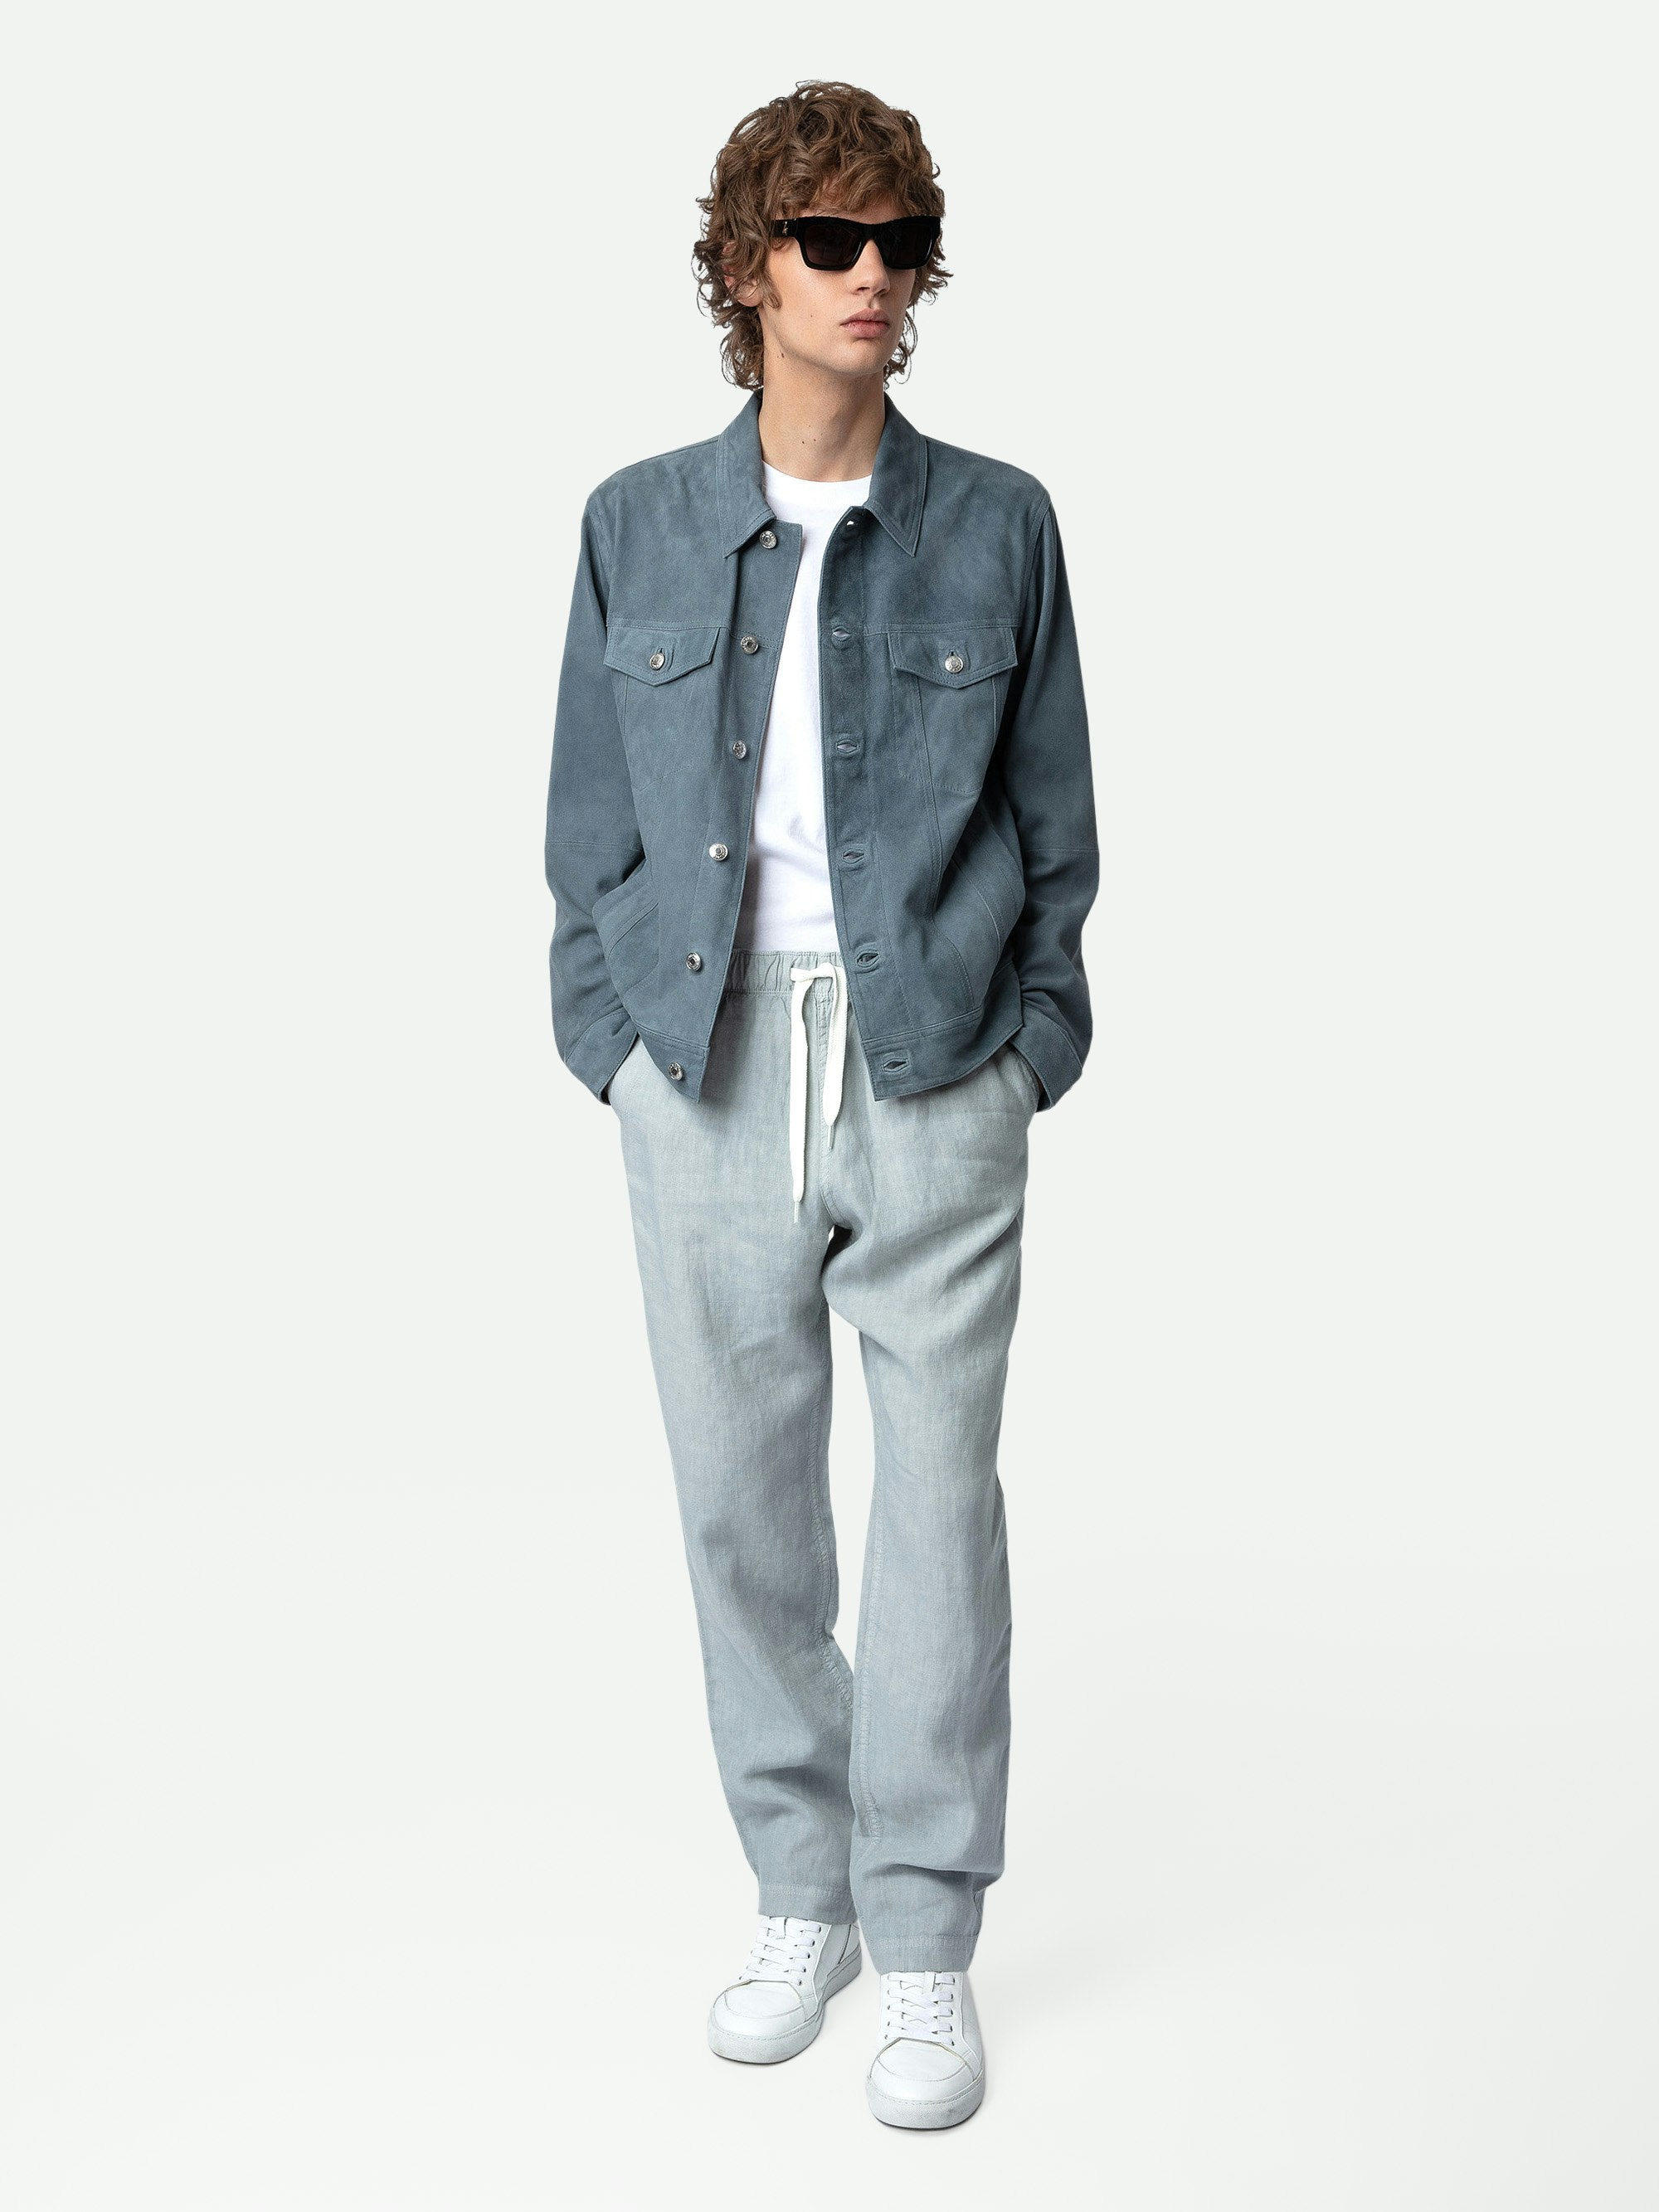 Pixel Linen Pants - Sky blue washed linen pants with pockets and drawstring ties.